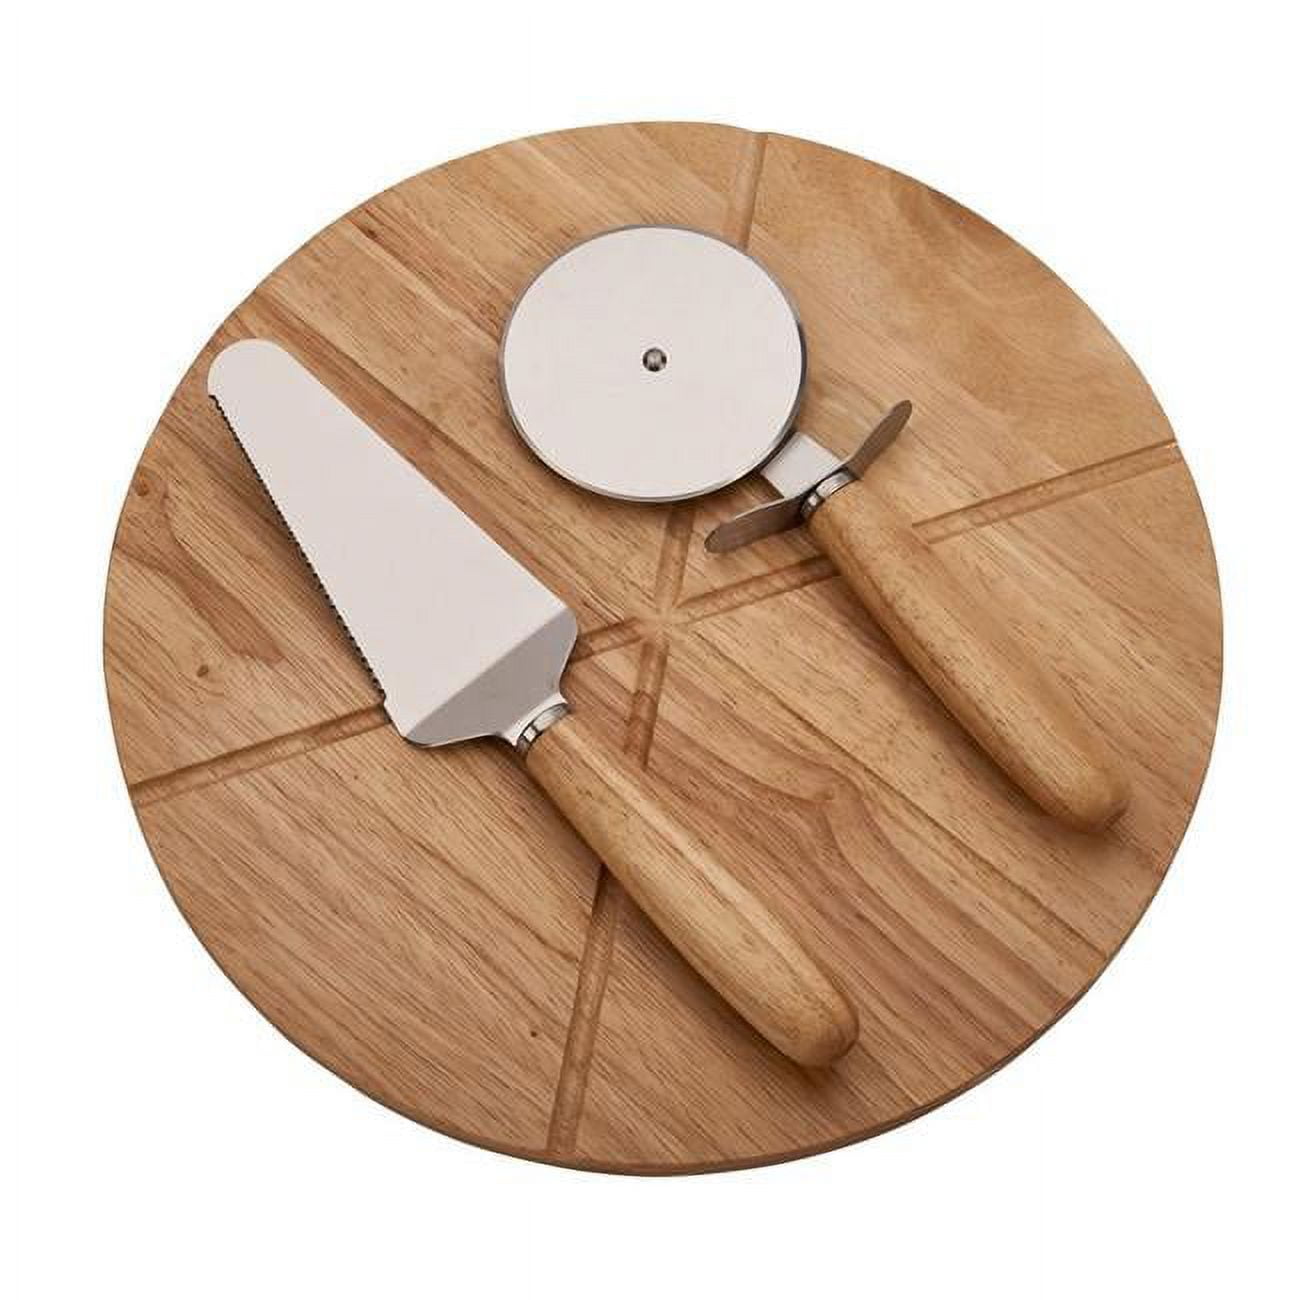 015842 14 In. Pizza Board With 2 Utensils